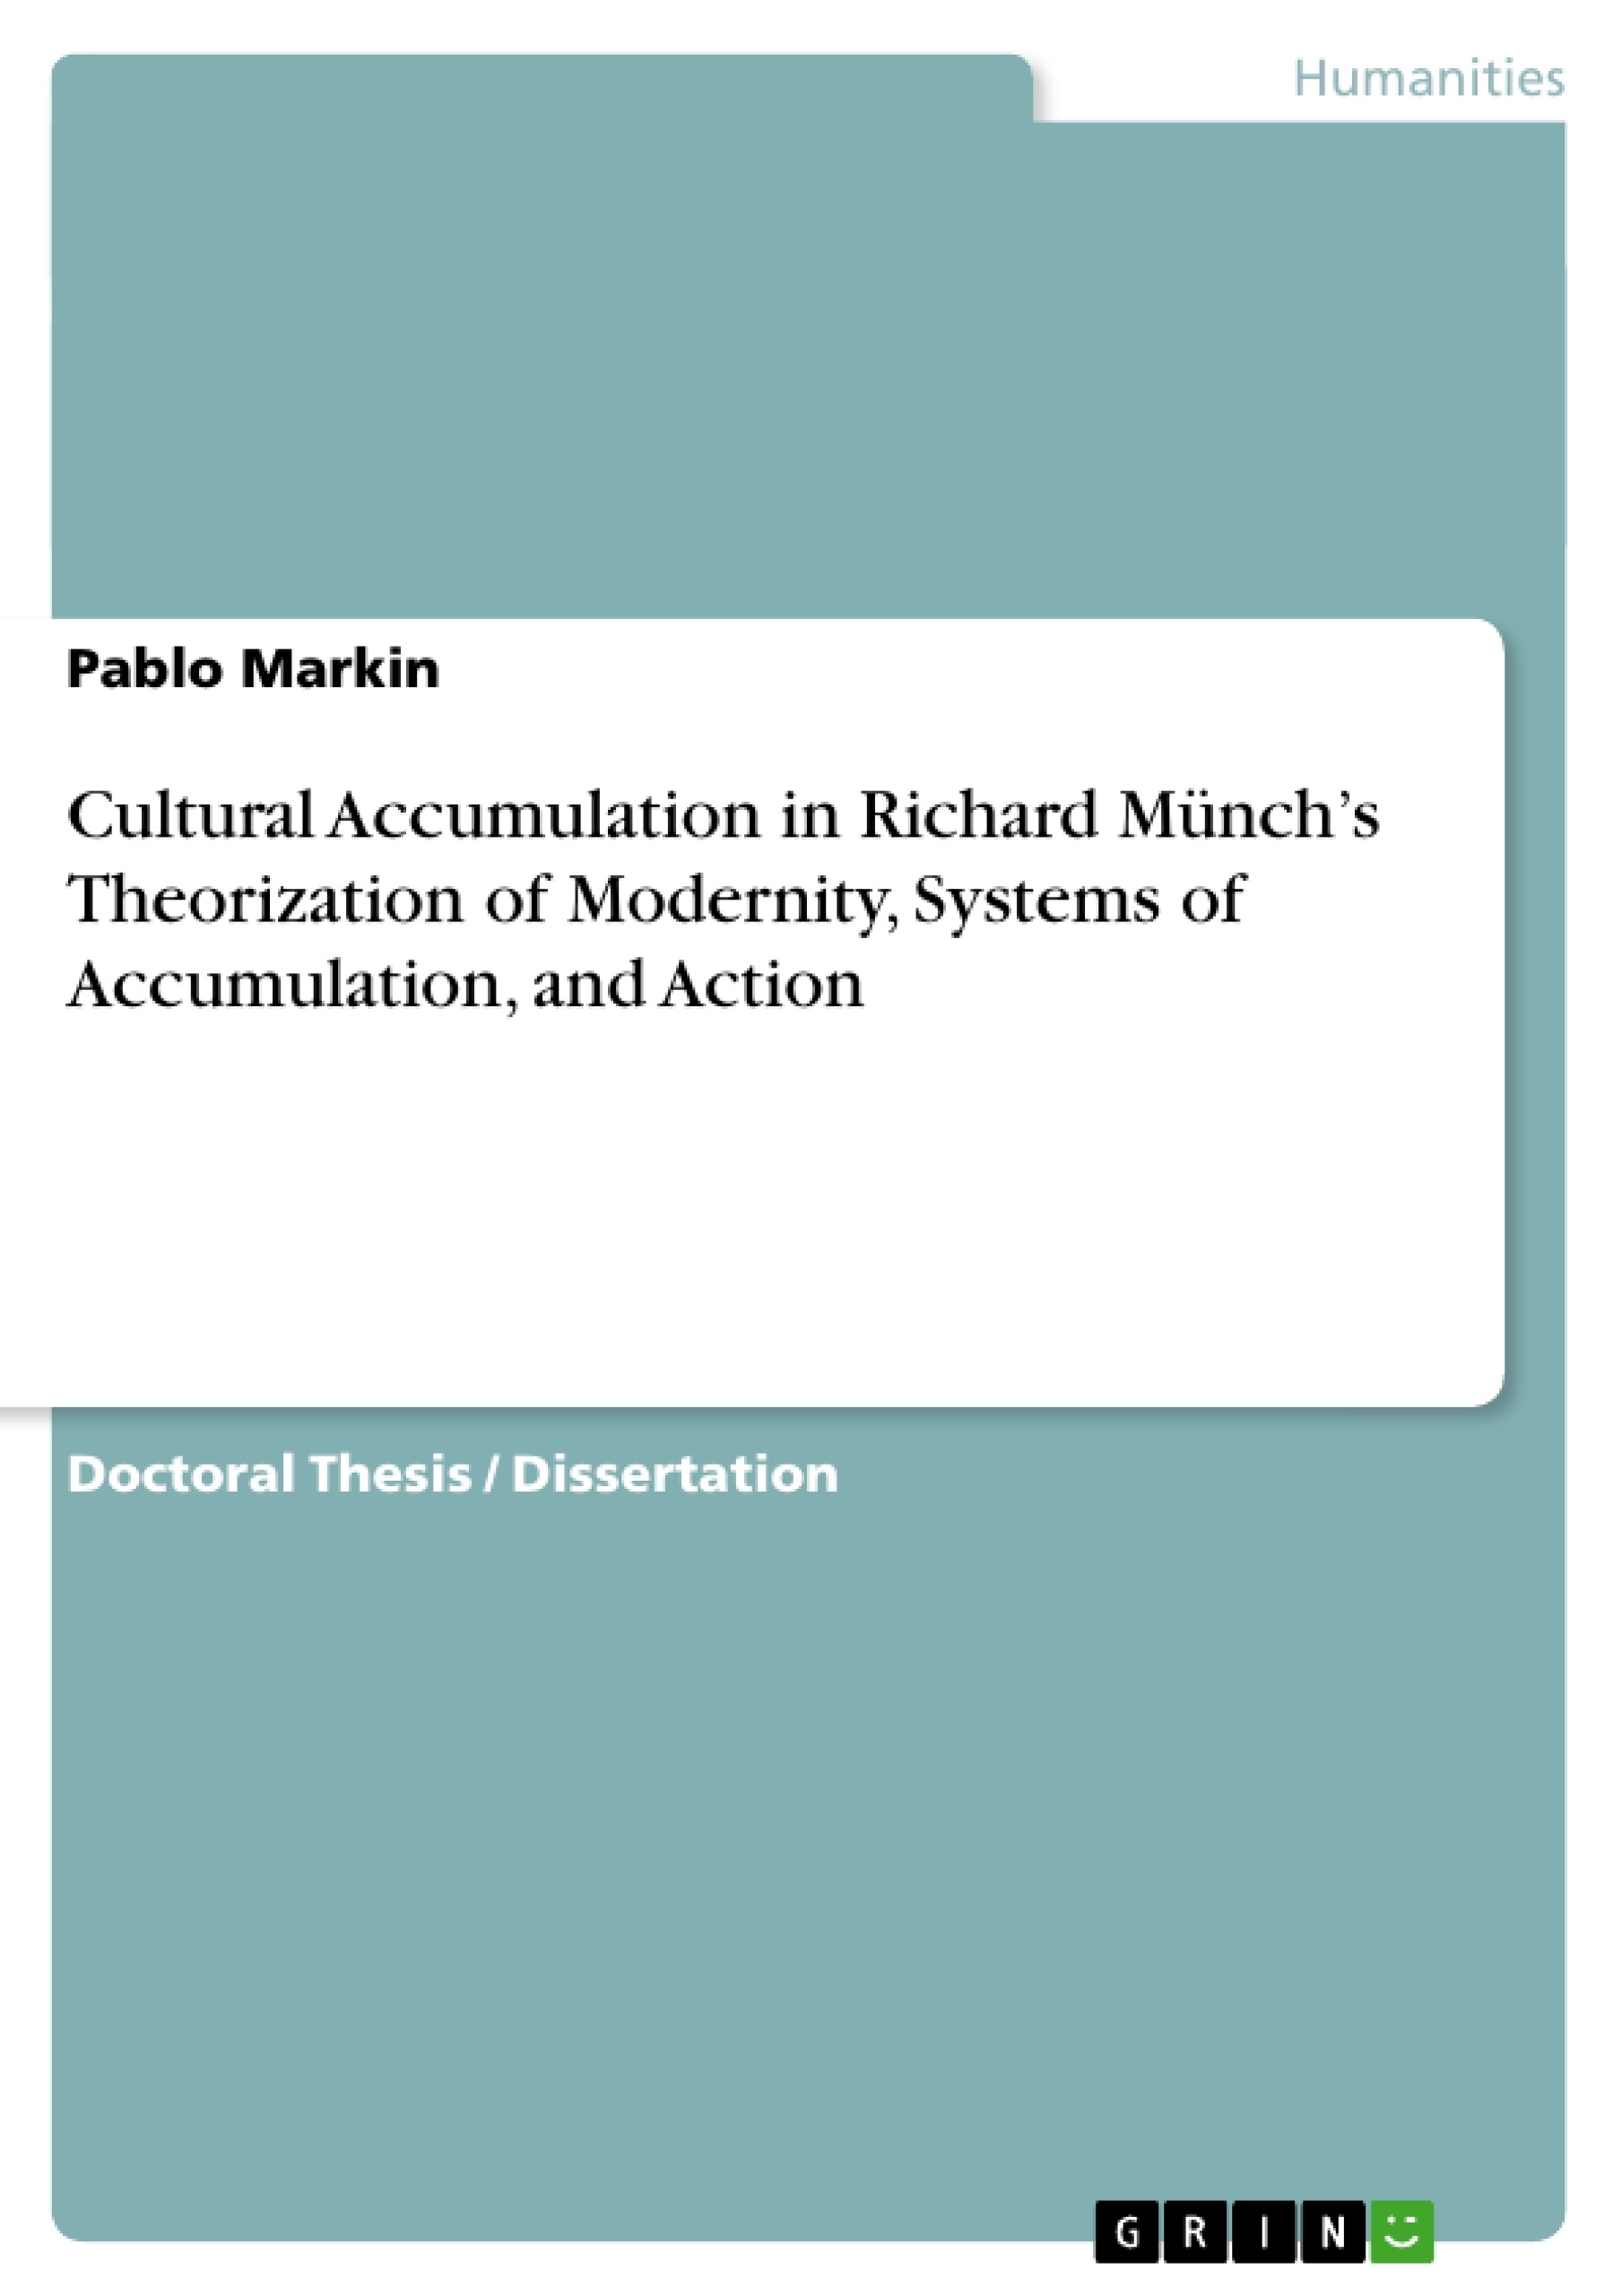 Title: Cultural Accumulation in Richard Münch’s Theorization of Modernity, Systems of Accumulation, and Action